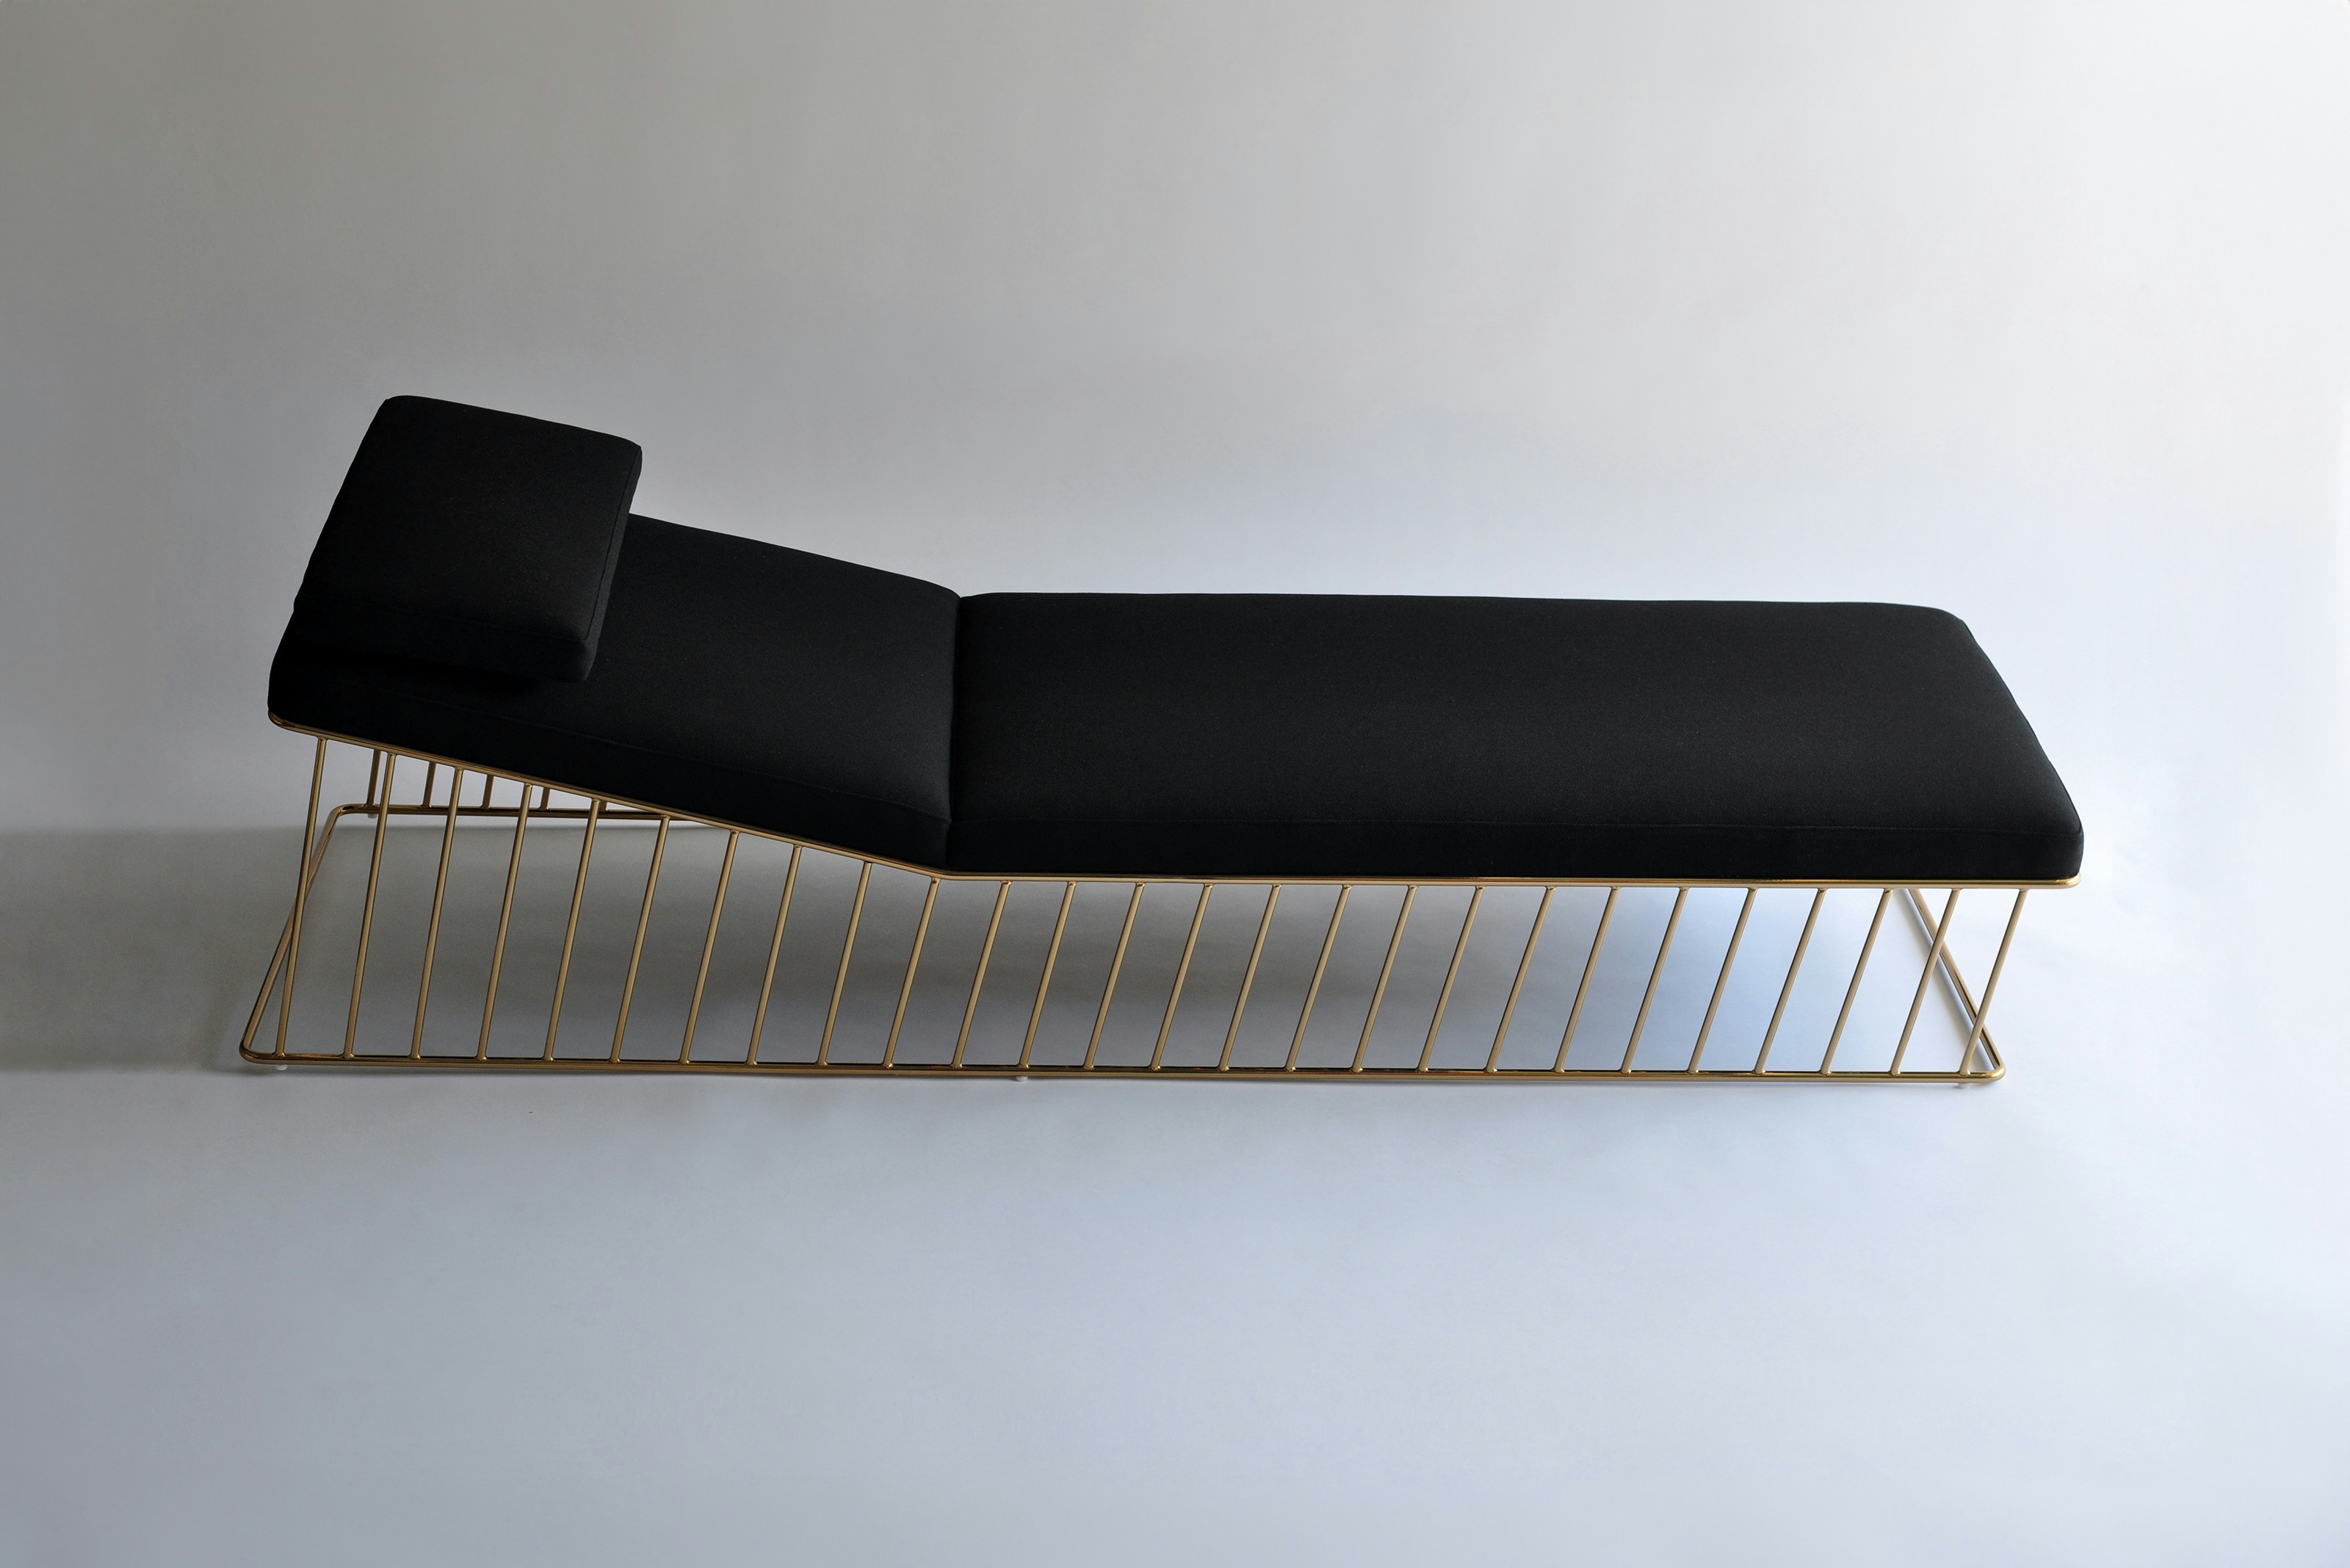 Wired Italic Chaise Indoor 1 Product Page Web